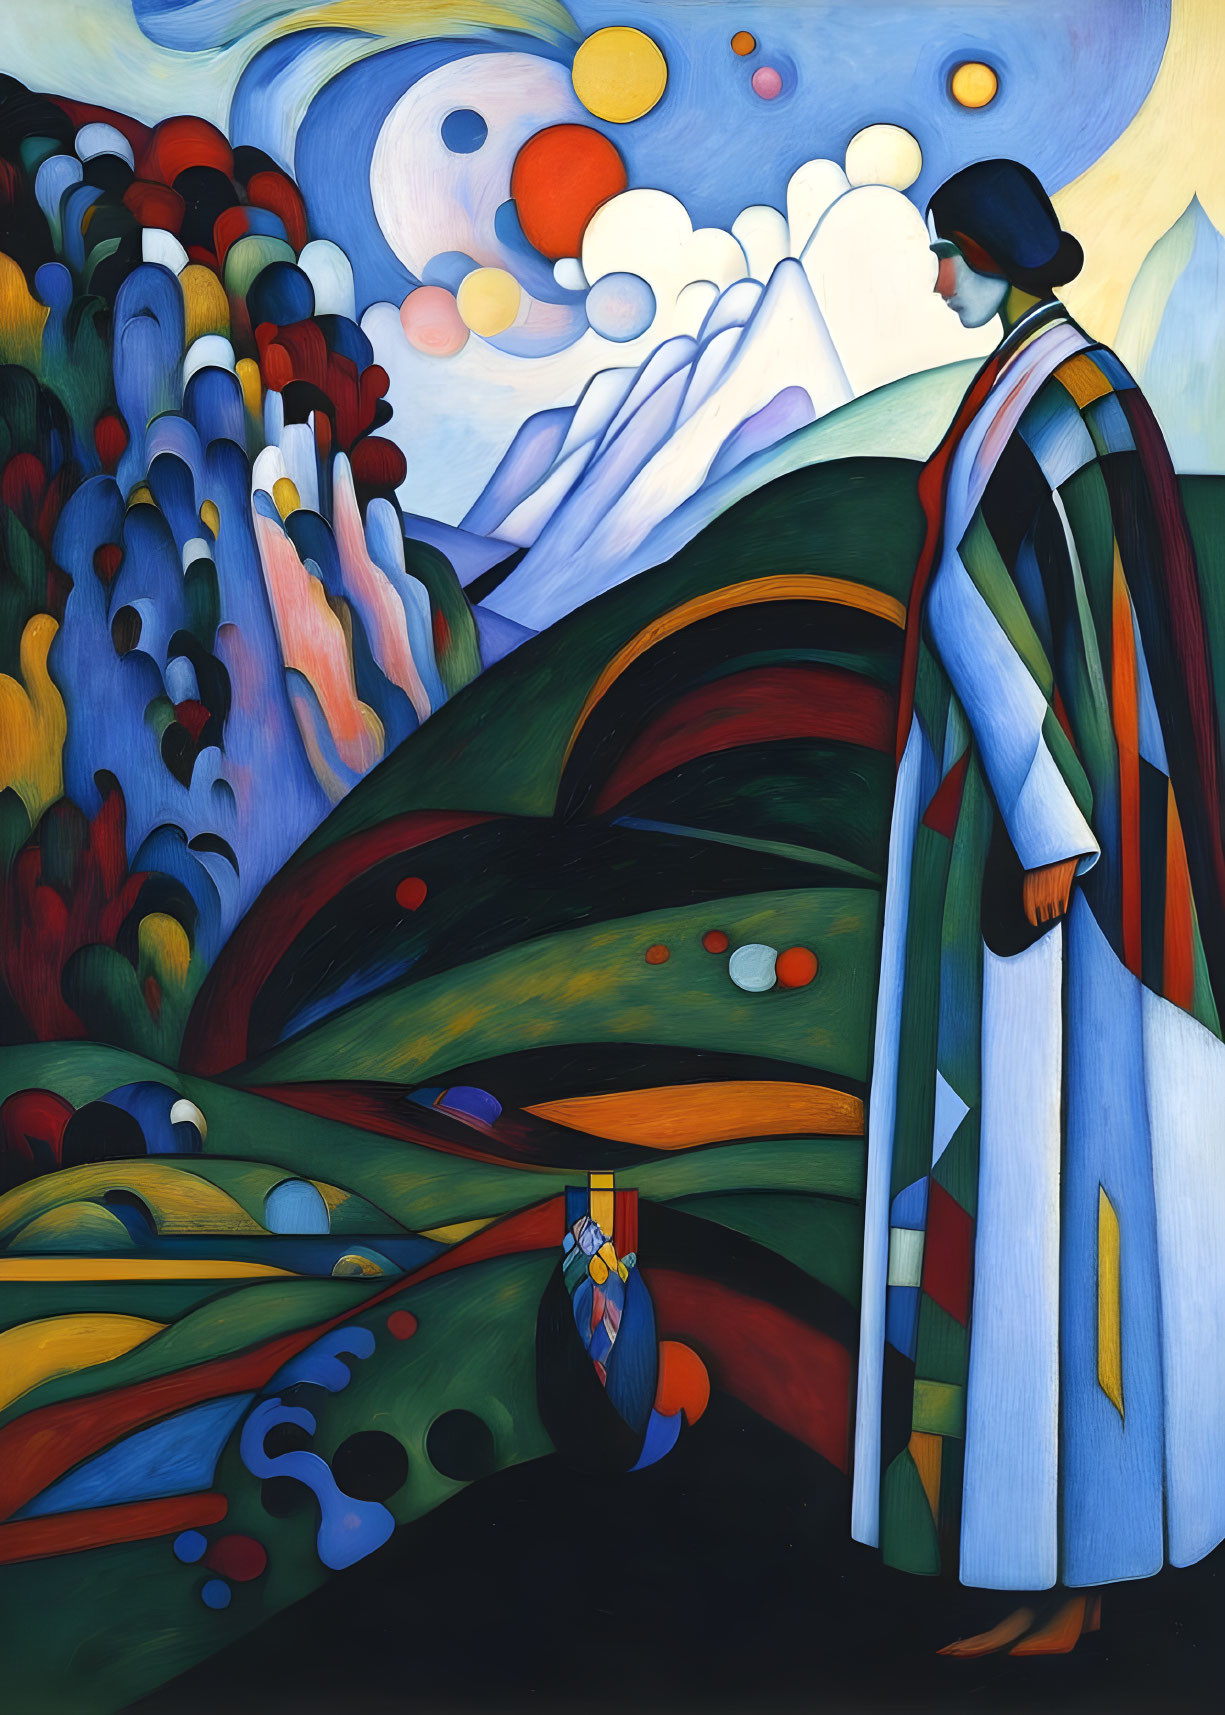 Stylized painting of woman in striped dress with vase in scenic landscape